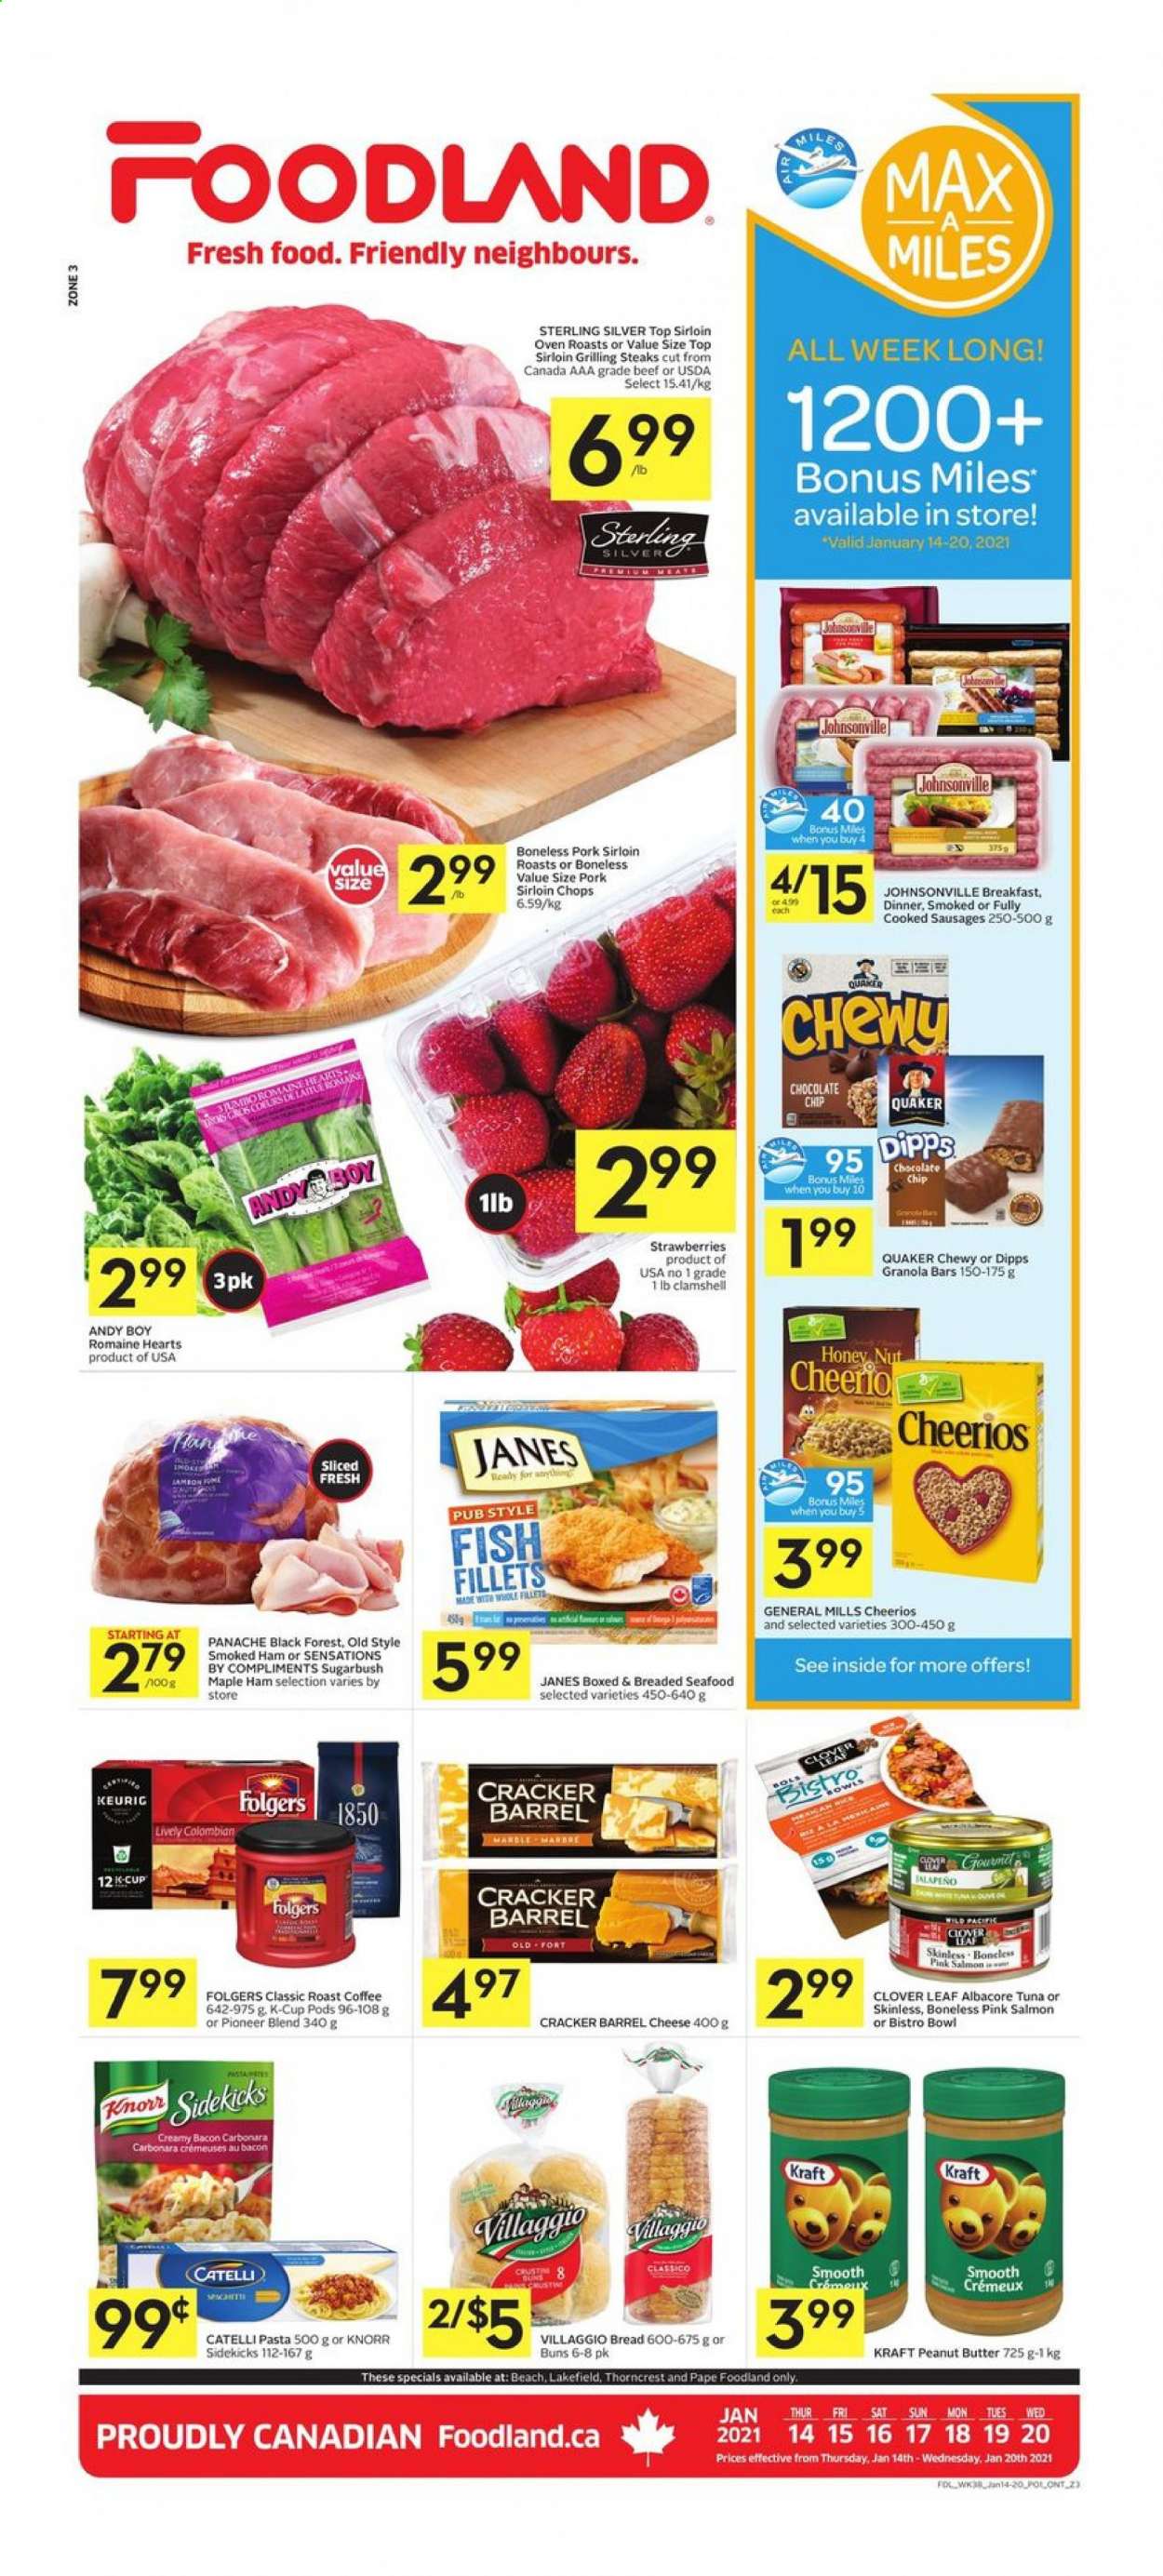 thumbnail - Foodland Flyer - January 14, 2021 - January 20, 2021 - Sales products - bread, buns, jalapeño, fish fillets, salmon, tuna, seafood, fish, pasta, Quaker, Kraft®, bacon, ham, smoked ham, Johnsonville, sausage, cheese, Clover, chocolate chips, crackers, Cheerios, granola bar, Classico, peanut butter, coffee, Folgers, coffee capsules, K-Cups, Keurig, pork loin, Knorr, steak. Page 1.